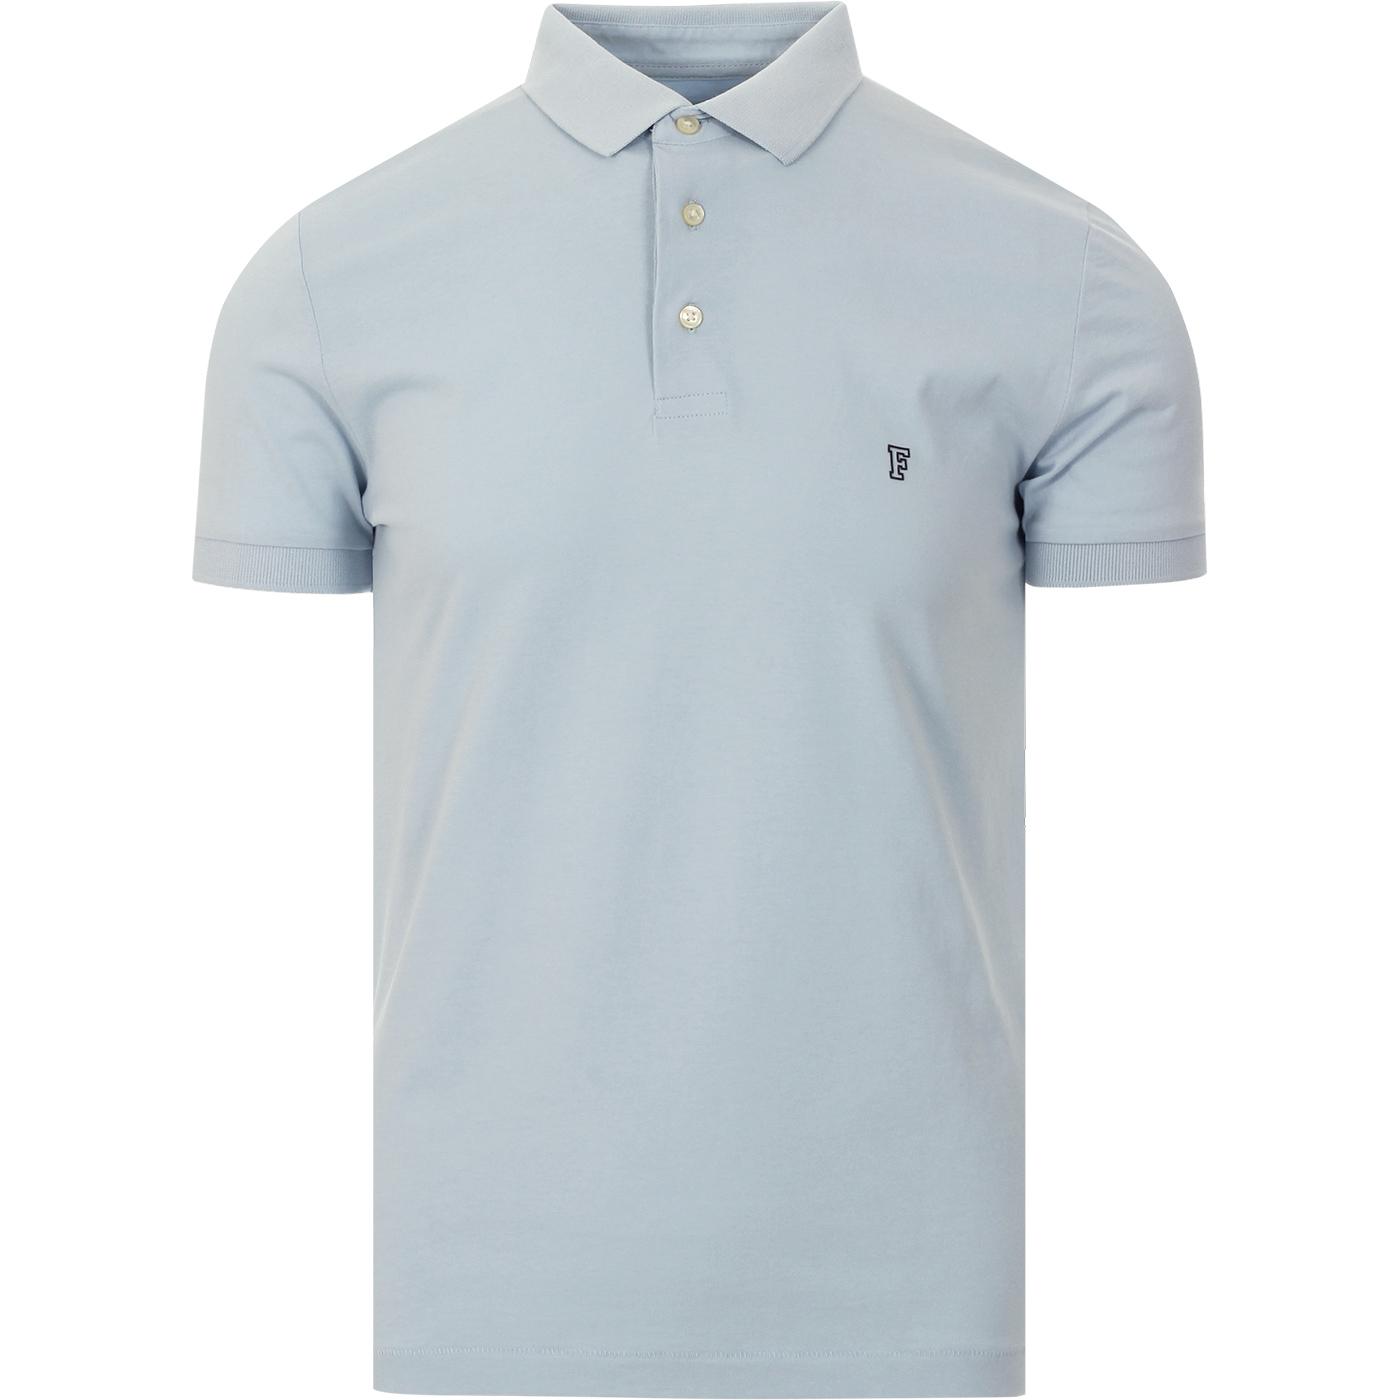 Sneezy FRENCH CONNECTION Retro Mod Jersey Polo CB